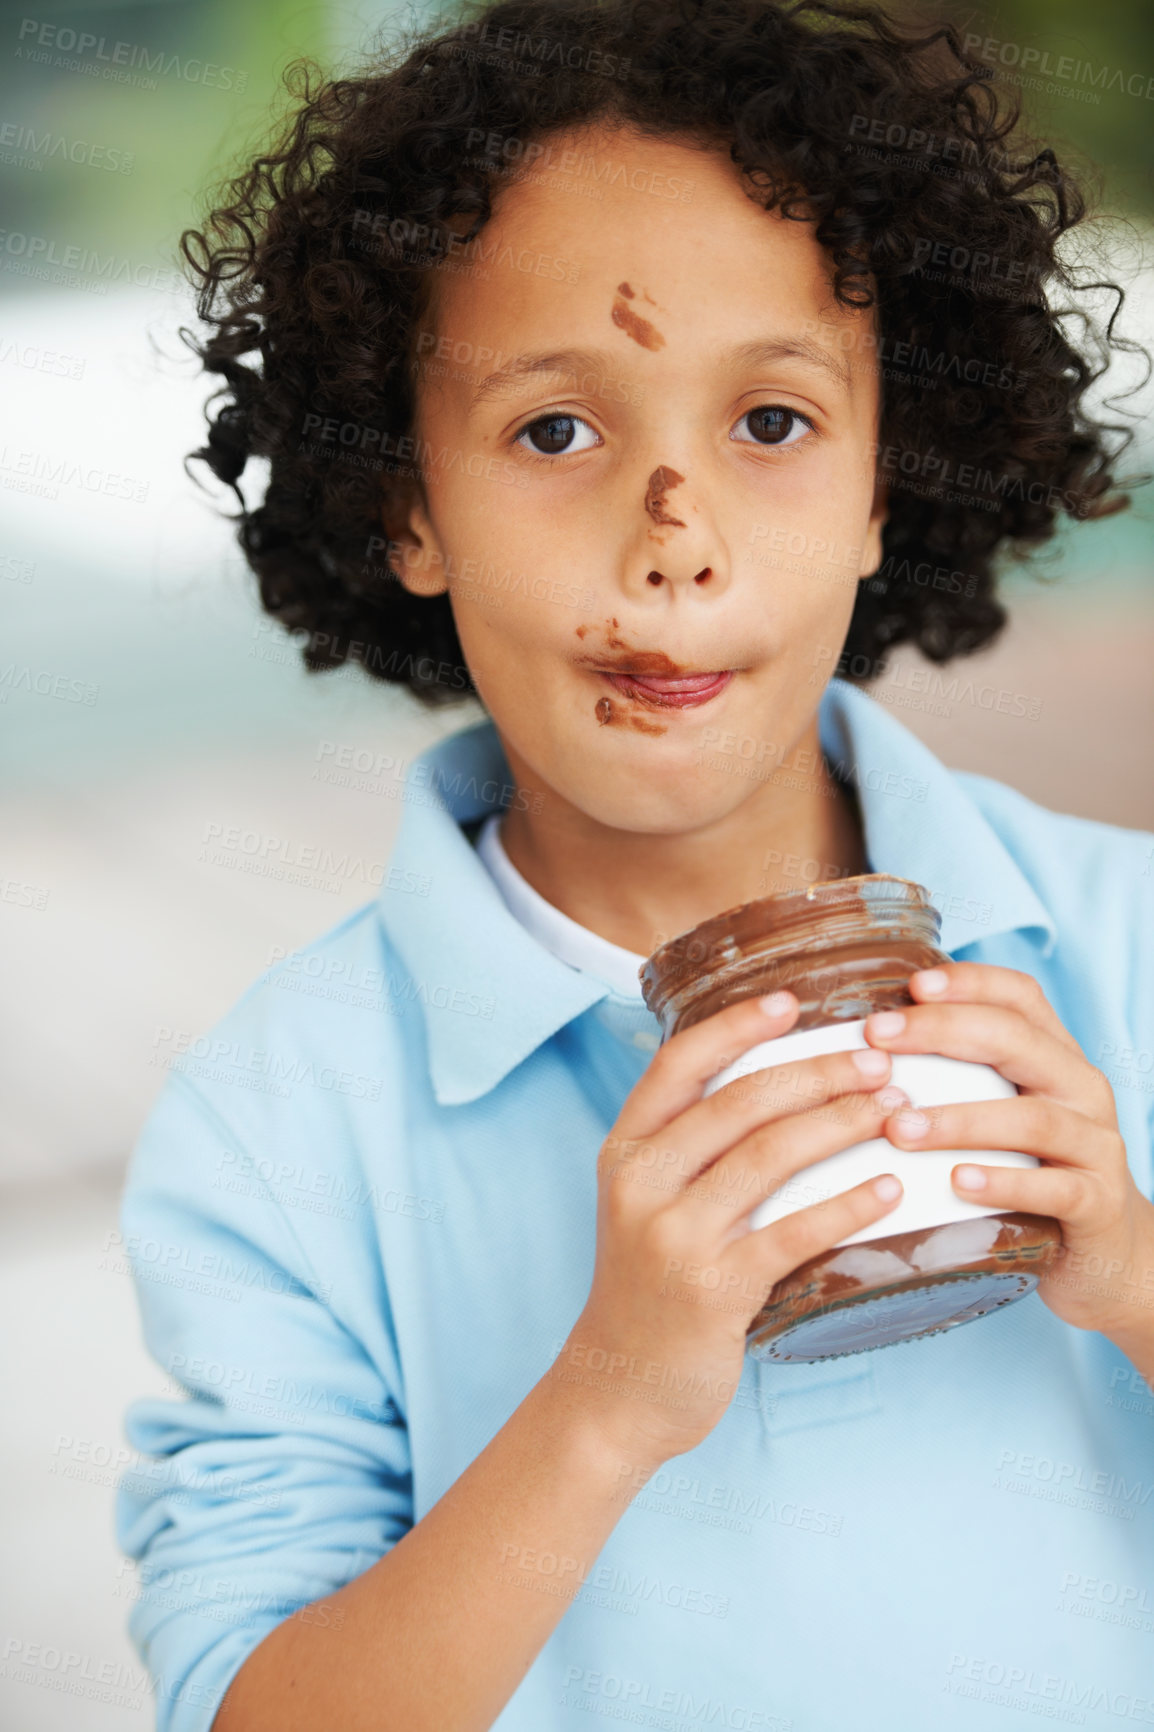 Buy stock photo Cute, portrait and child with chocolate spread at a home with delicious, sweet snack or treat. Smile, happy and face of young boy kid from Mexico eating nutella jar licking lips at modern house.